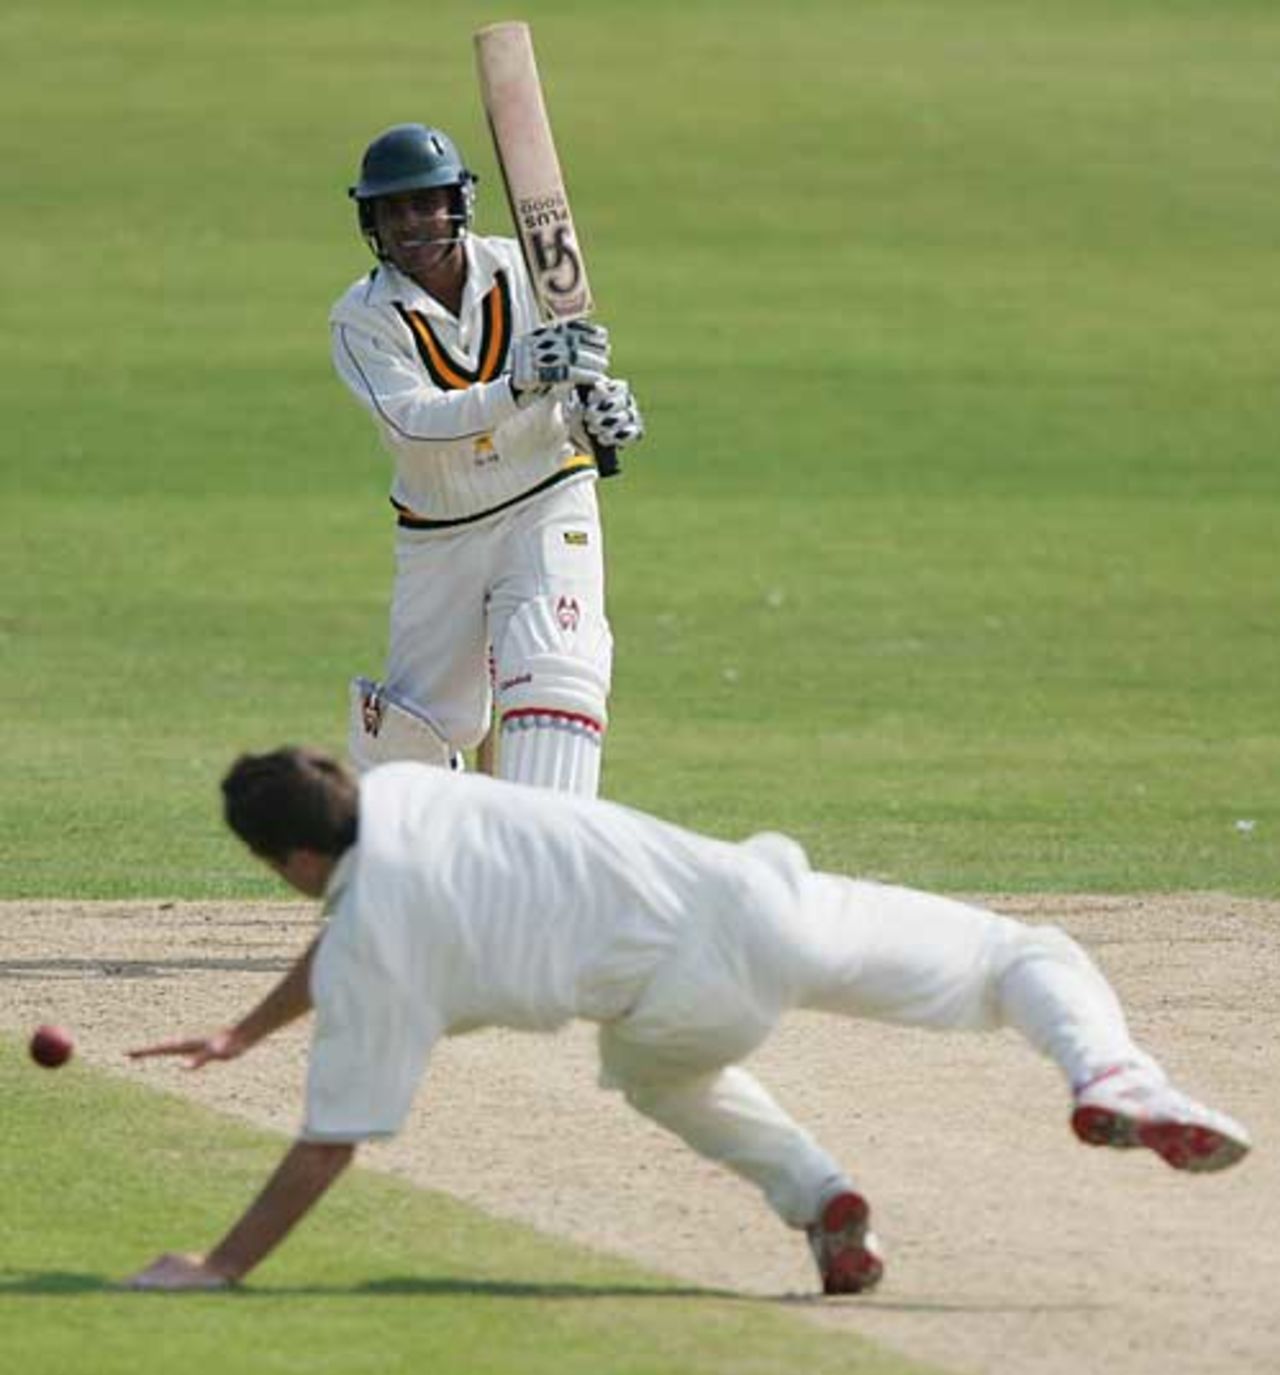 Taimur Ali drives past Chris Woakes during his 41, England Under-19 v Pakistan Under-19, 1st Test, Scarborough, August 5, 2007